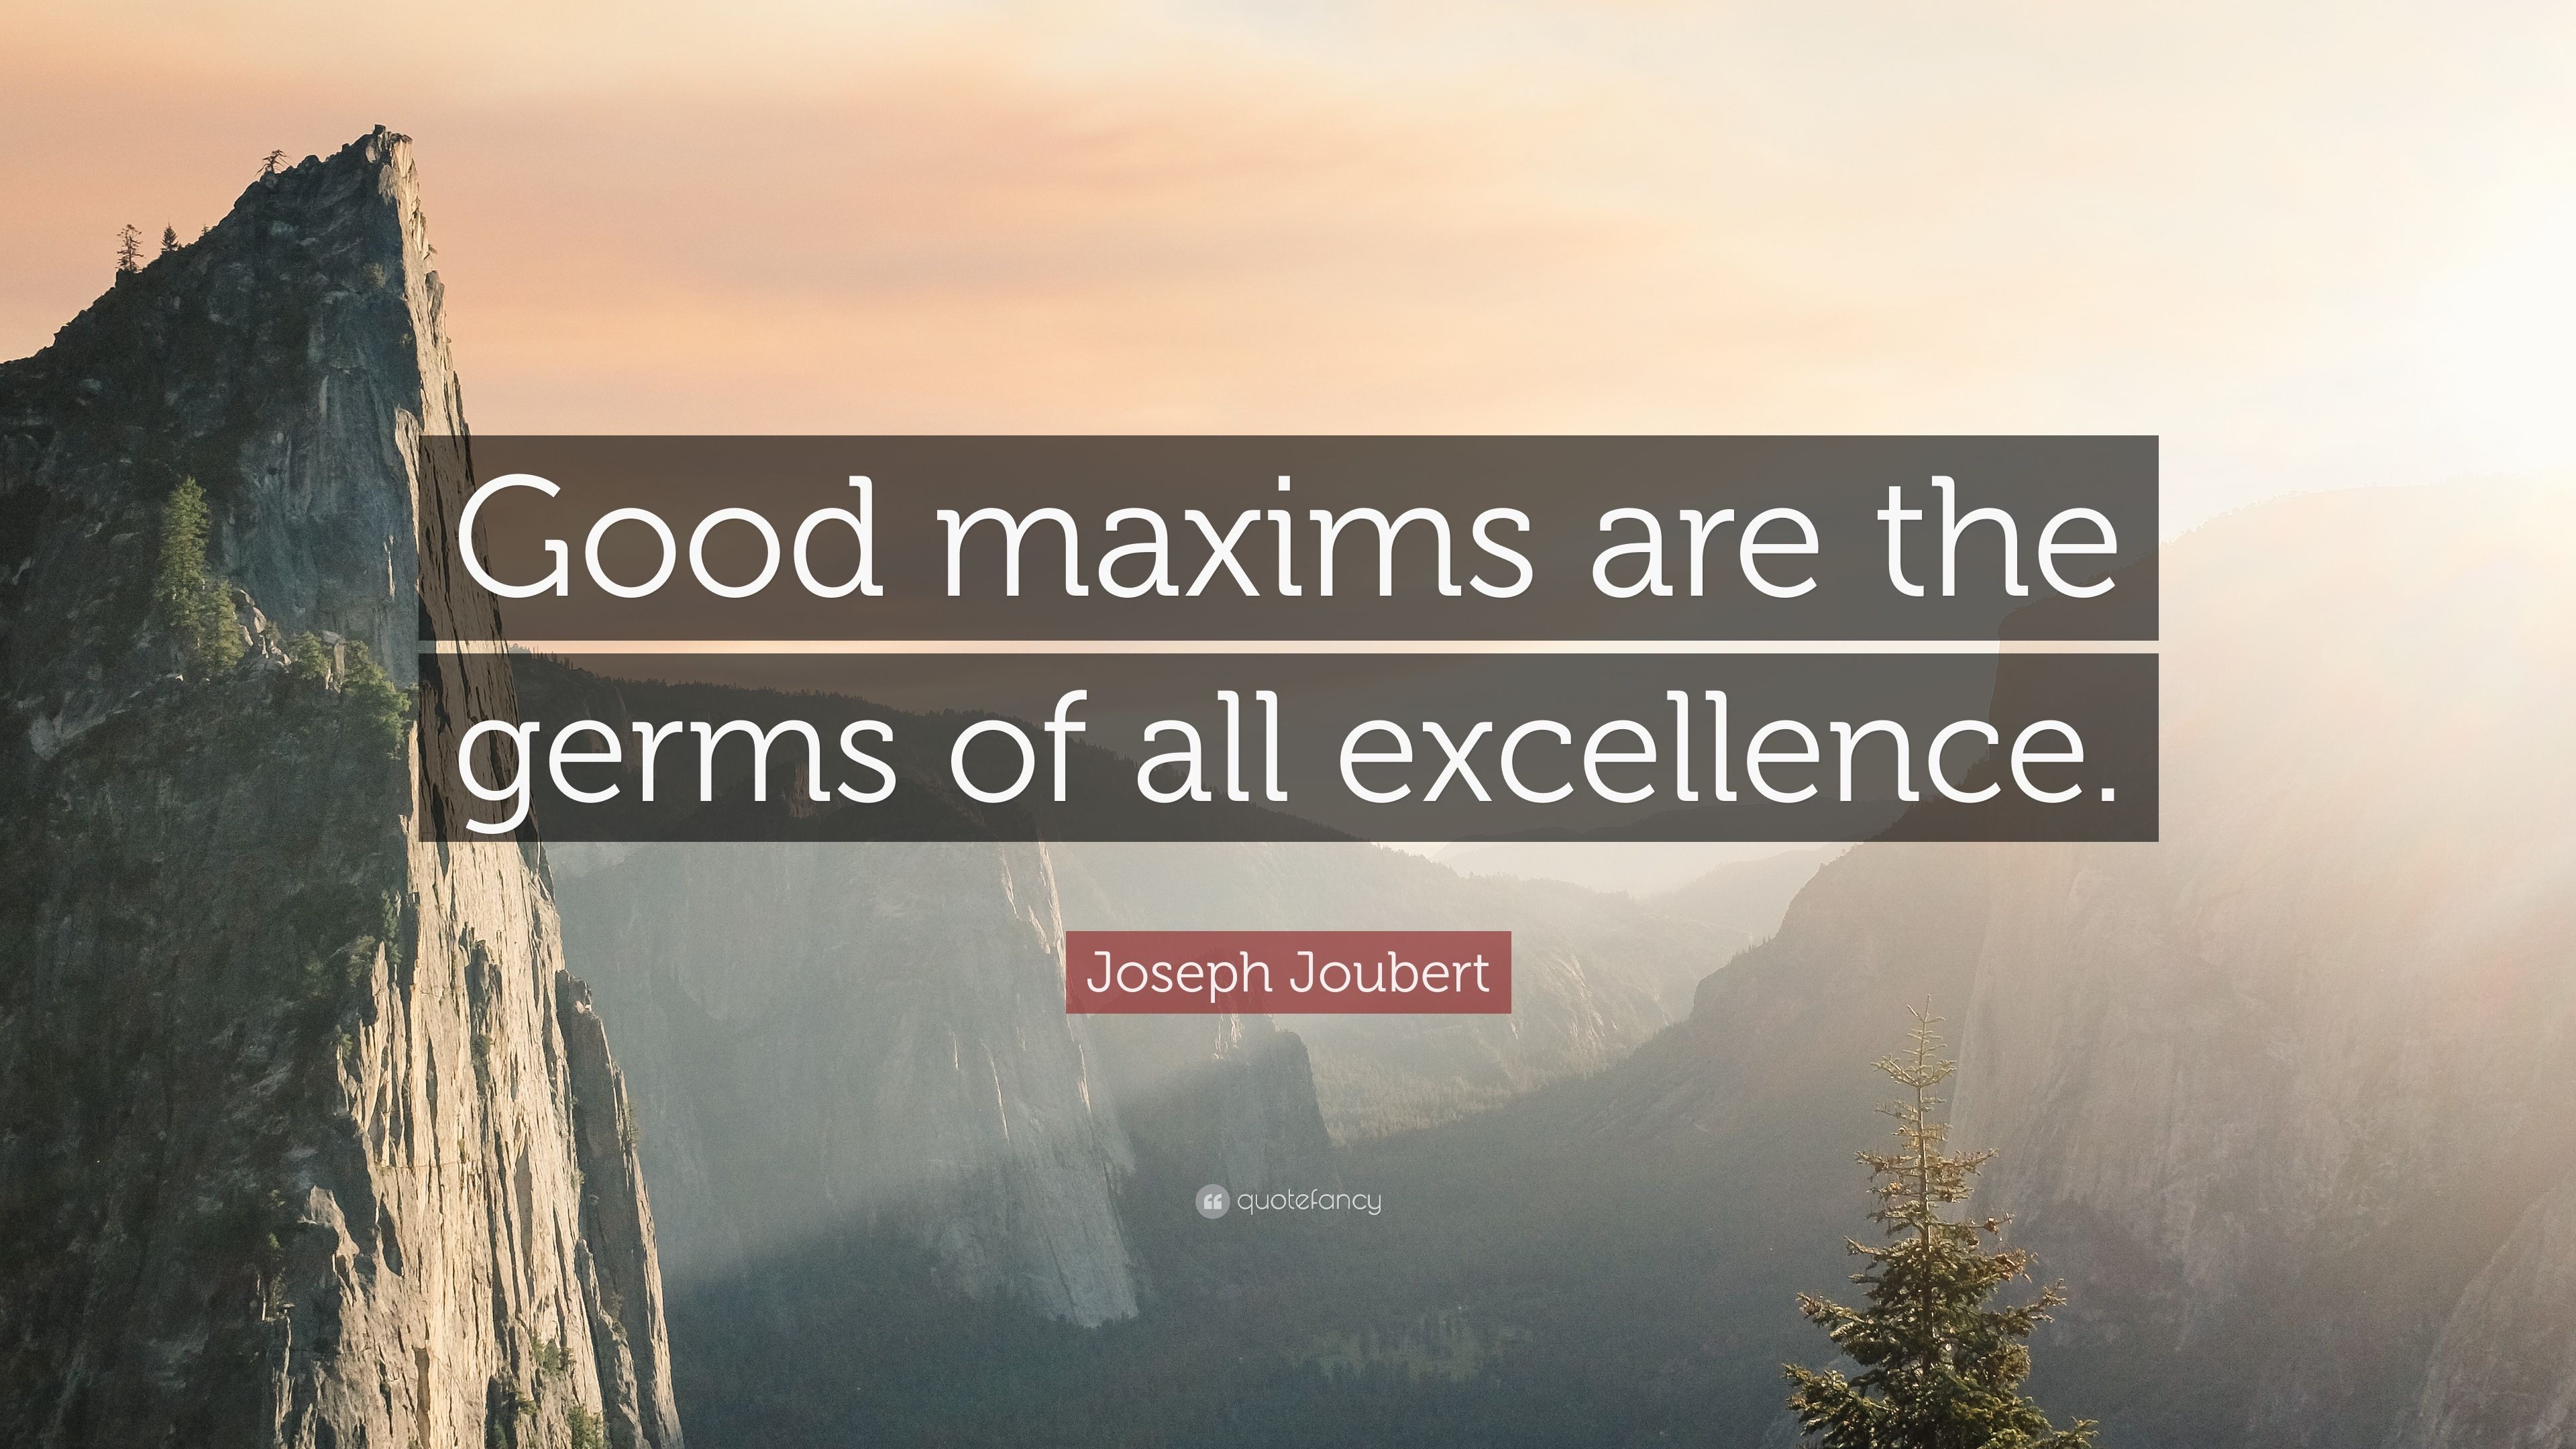 Joseph Joubert Quote: “Good maxims are the germs of all excellence